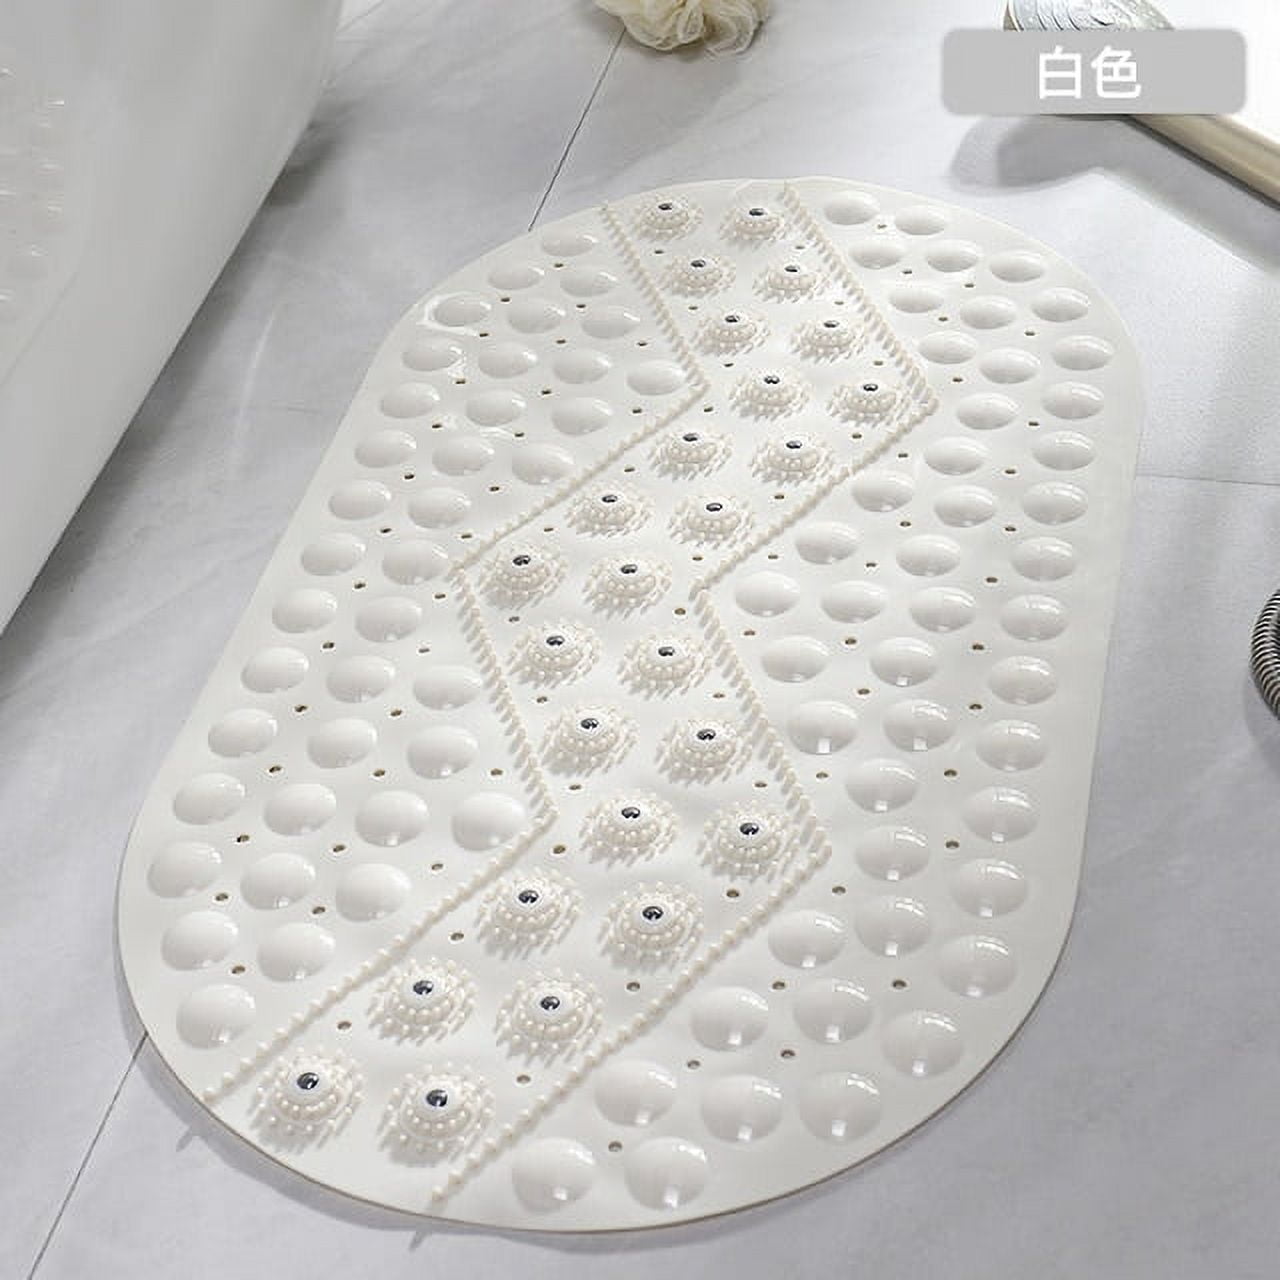 Silicone World Bathroom Anti-skid Mats PVC Shower Anti Fall Foot Mat  Dolphin Massage Suction Cup With Drain Hole Floor Mat - AliExpress